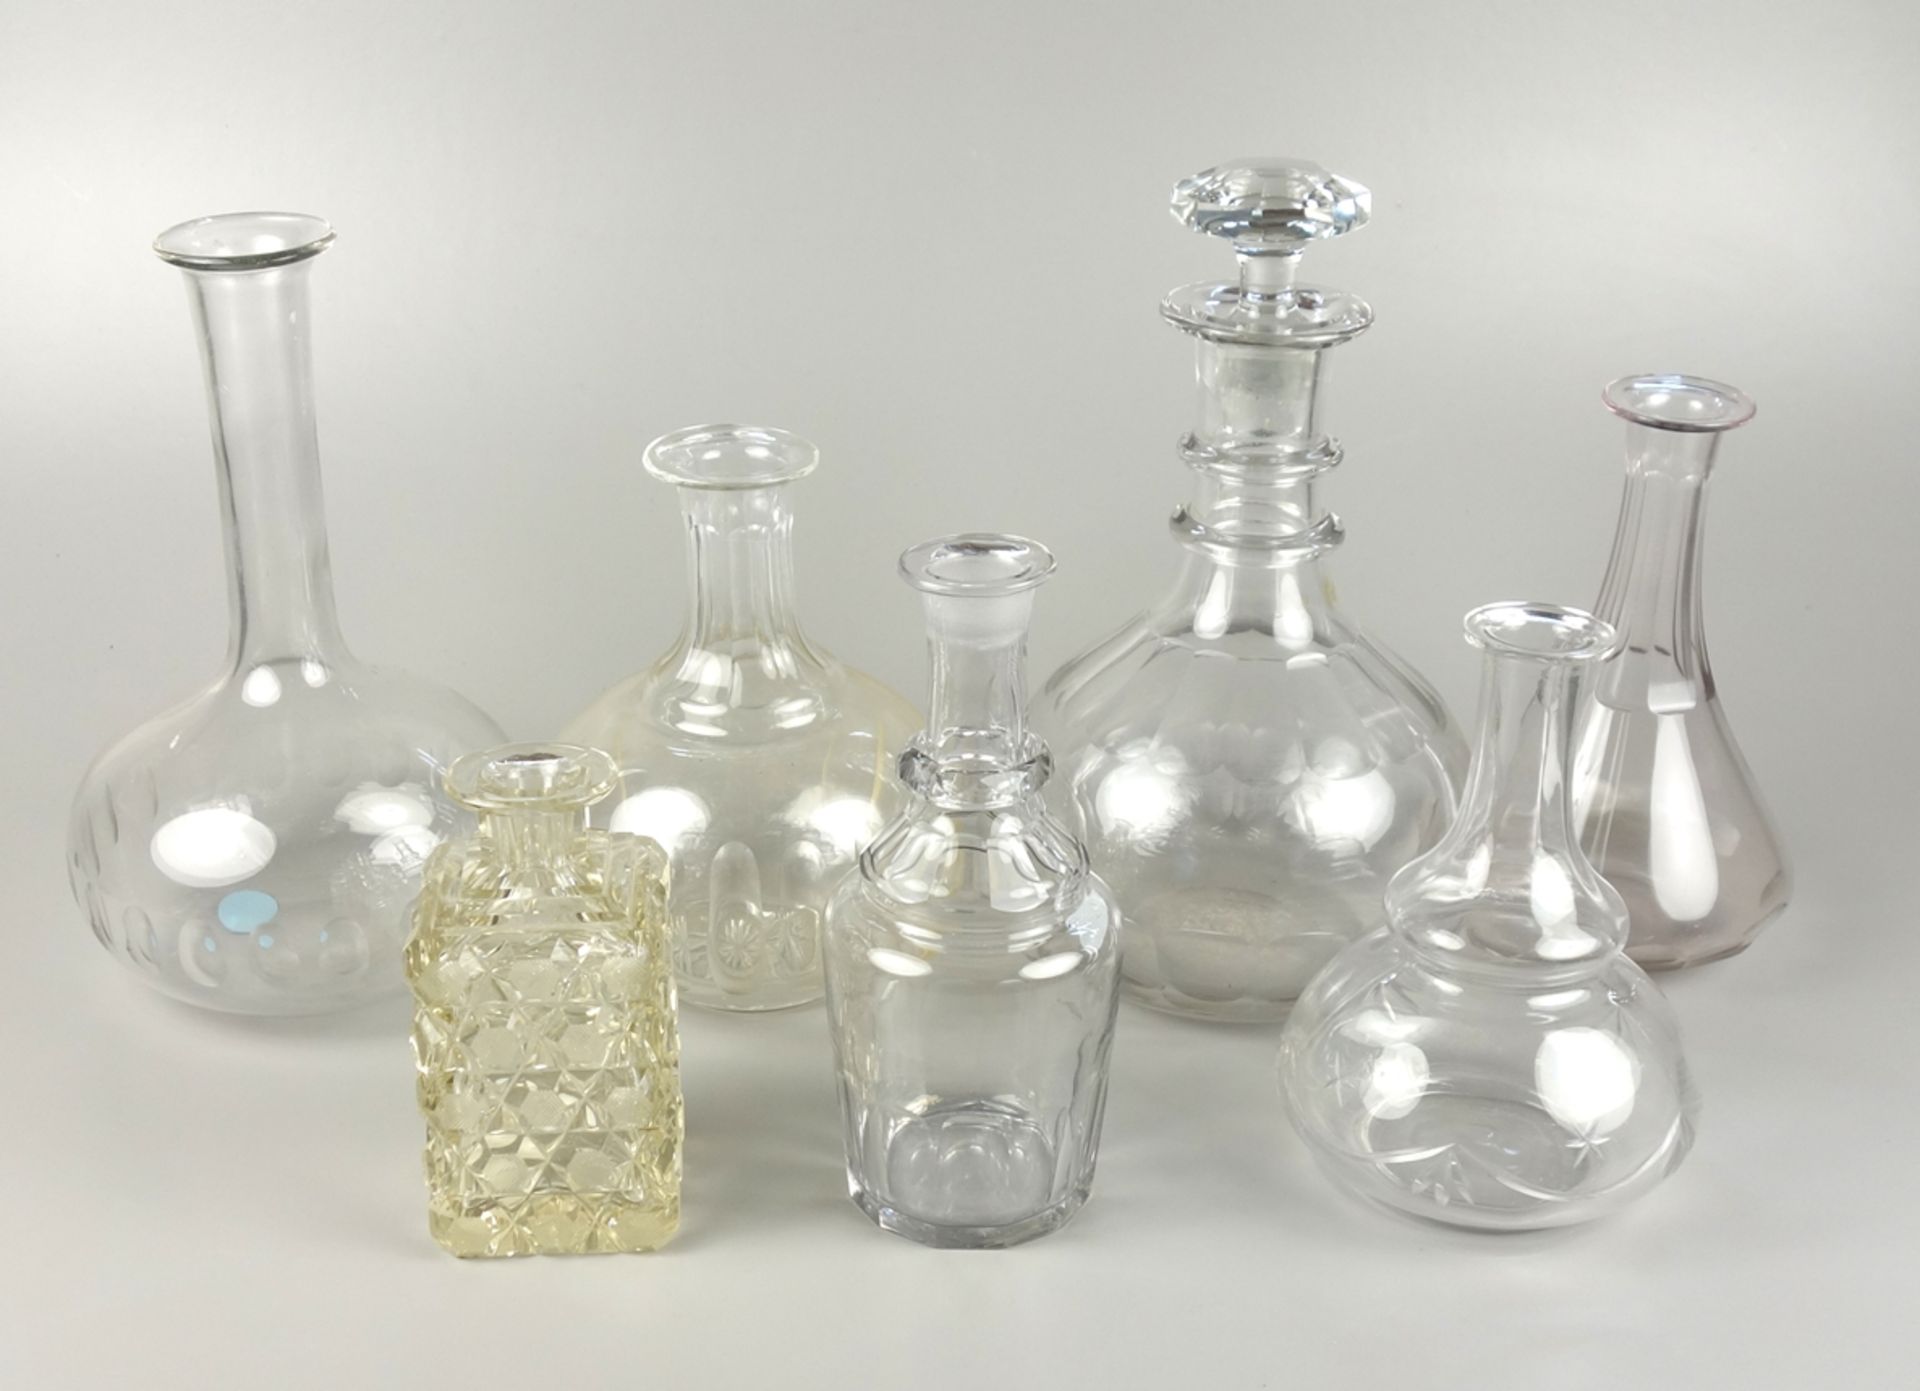 7 different carafes with cut decoration, end of 19th cent.